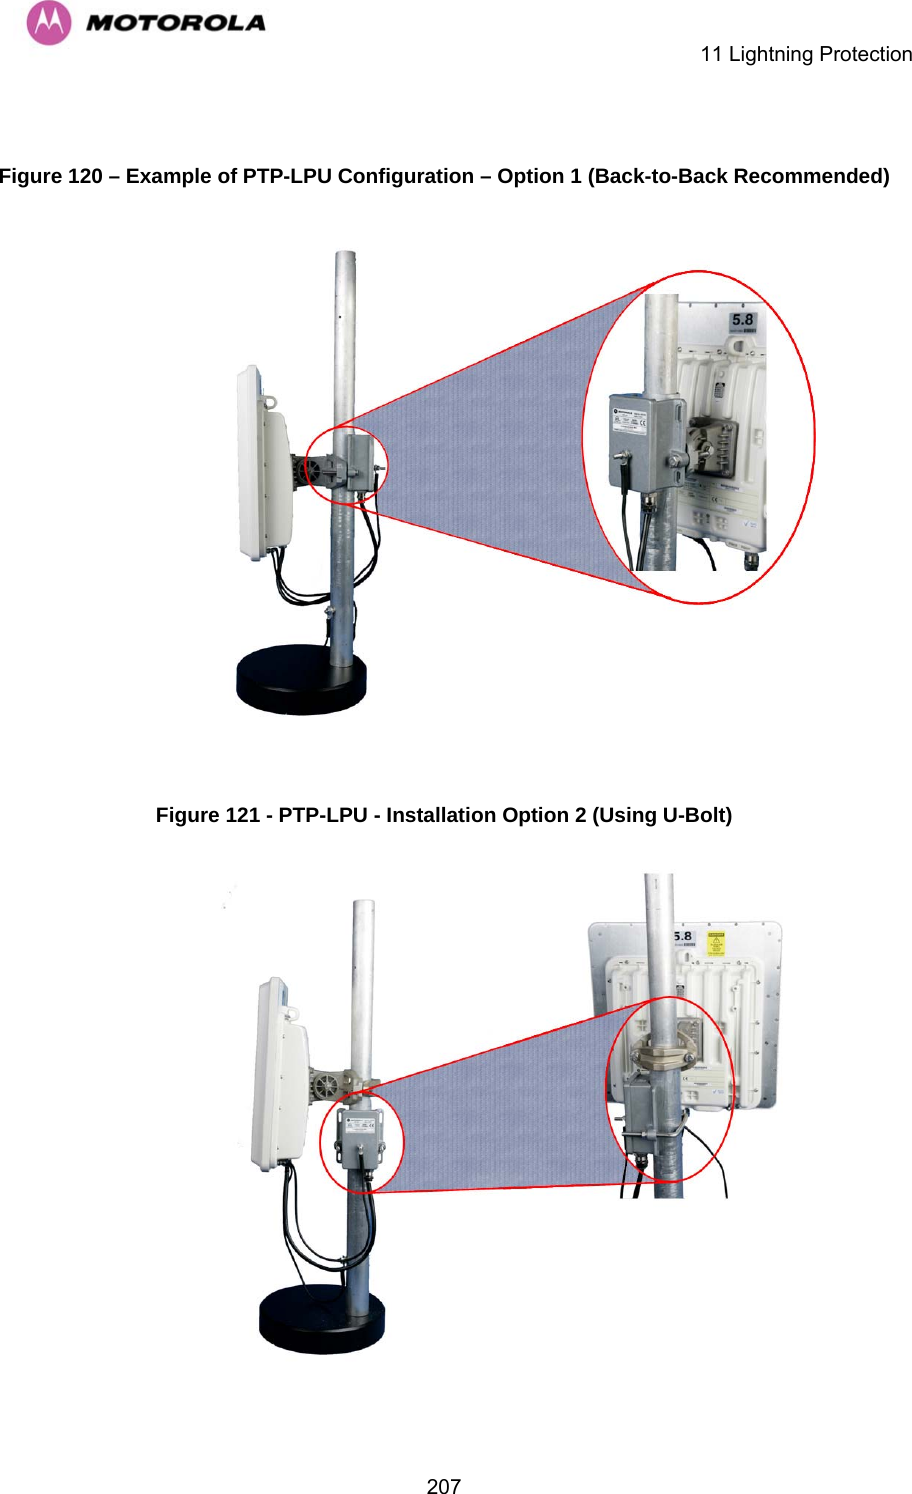    11 Lightning Protection  207 Figure 120 – Example of PTP-LPU Configuration – Option 1 (Back-to-Back Recommended)   Figure 121 - PTP-LPU - Installation Option 2 (Using U-Bolt)  